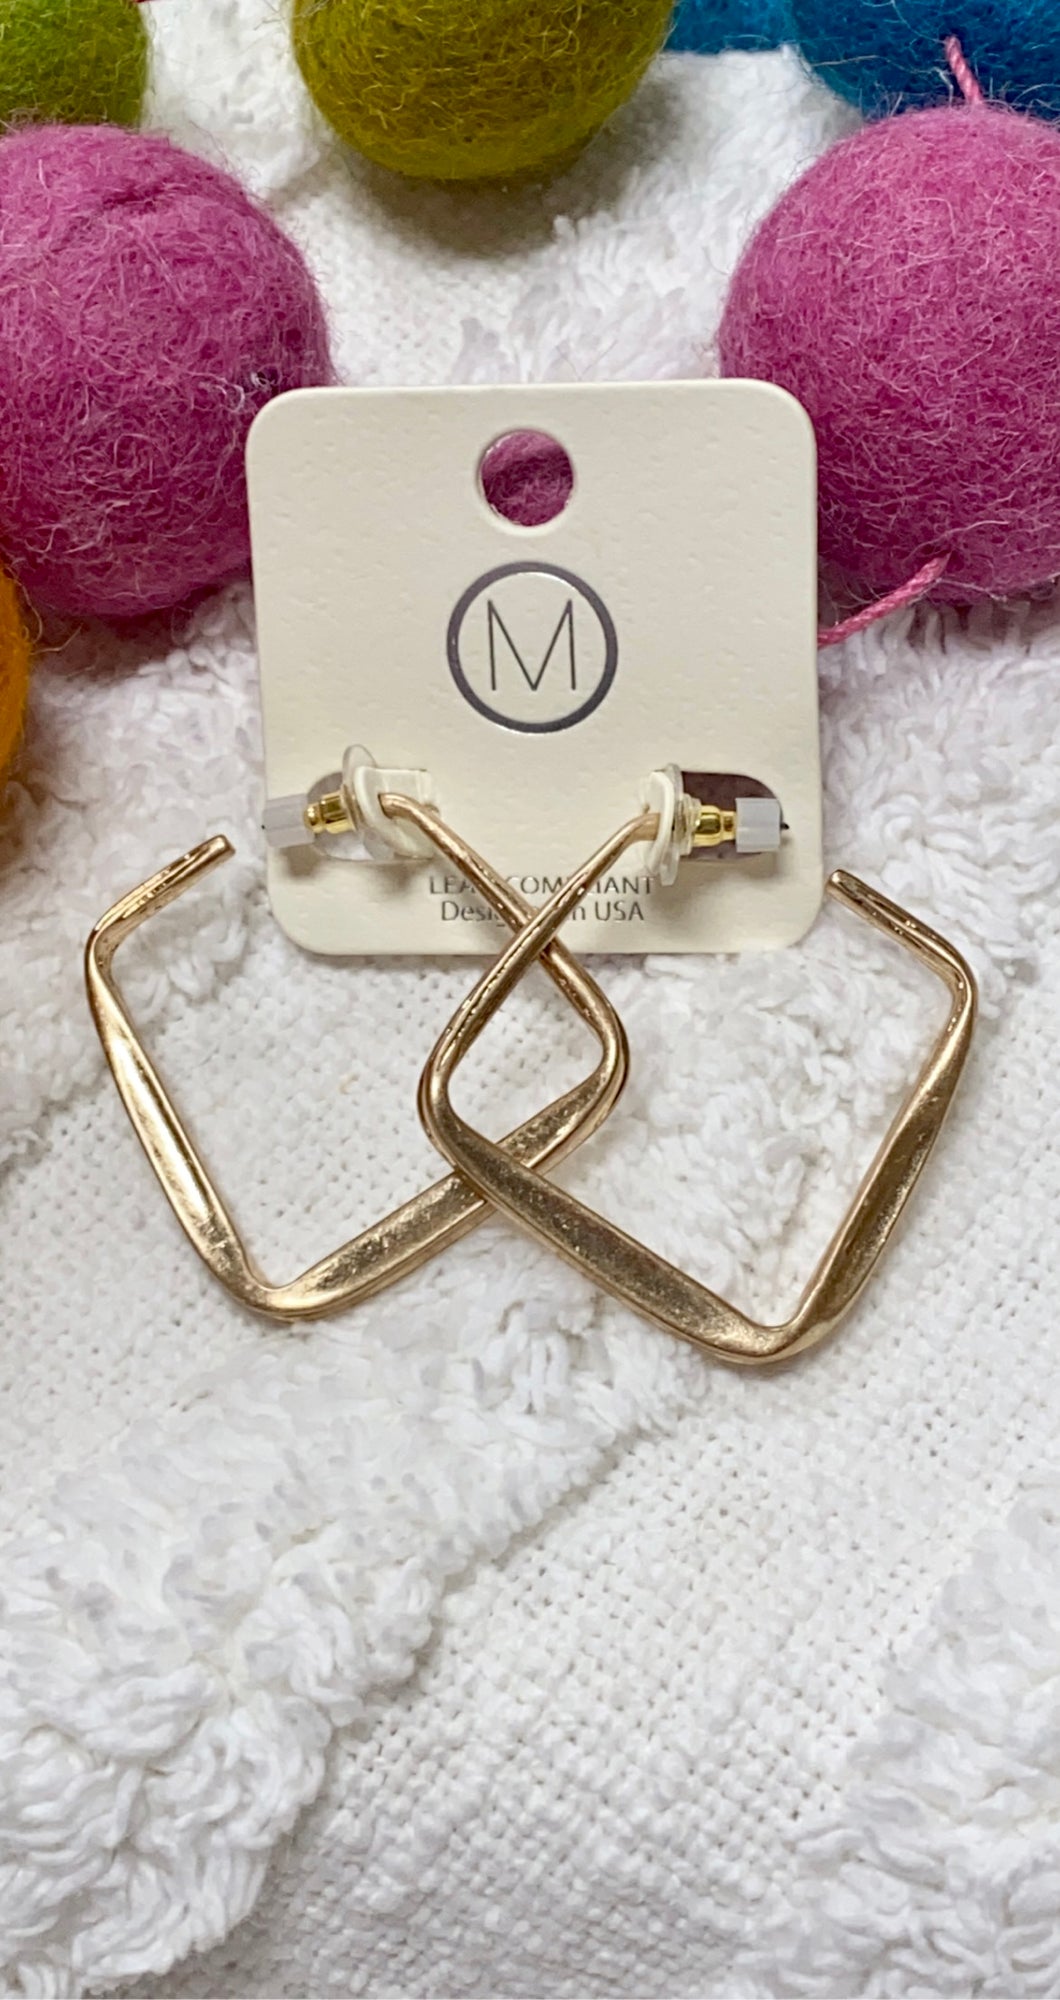 Worn Gold Square Hoops